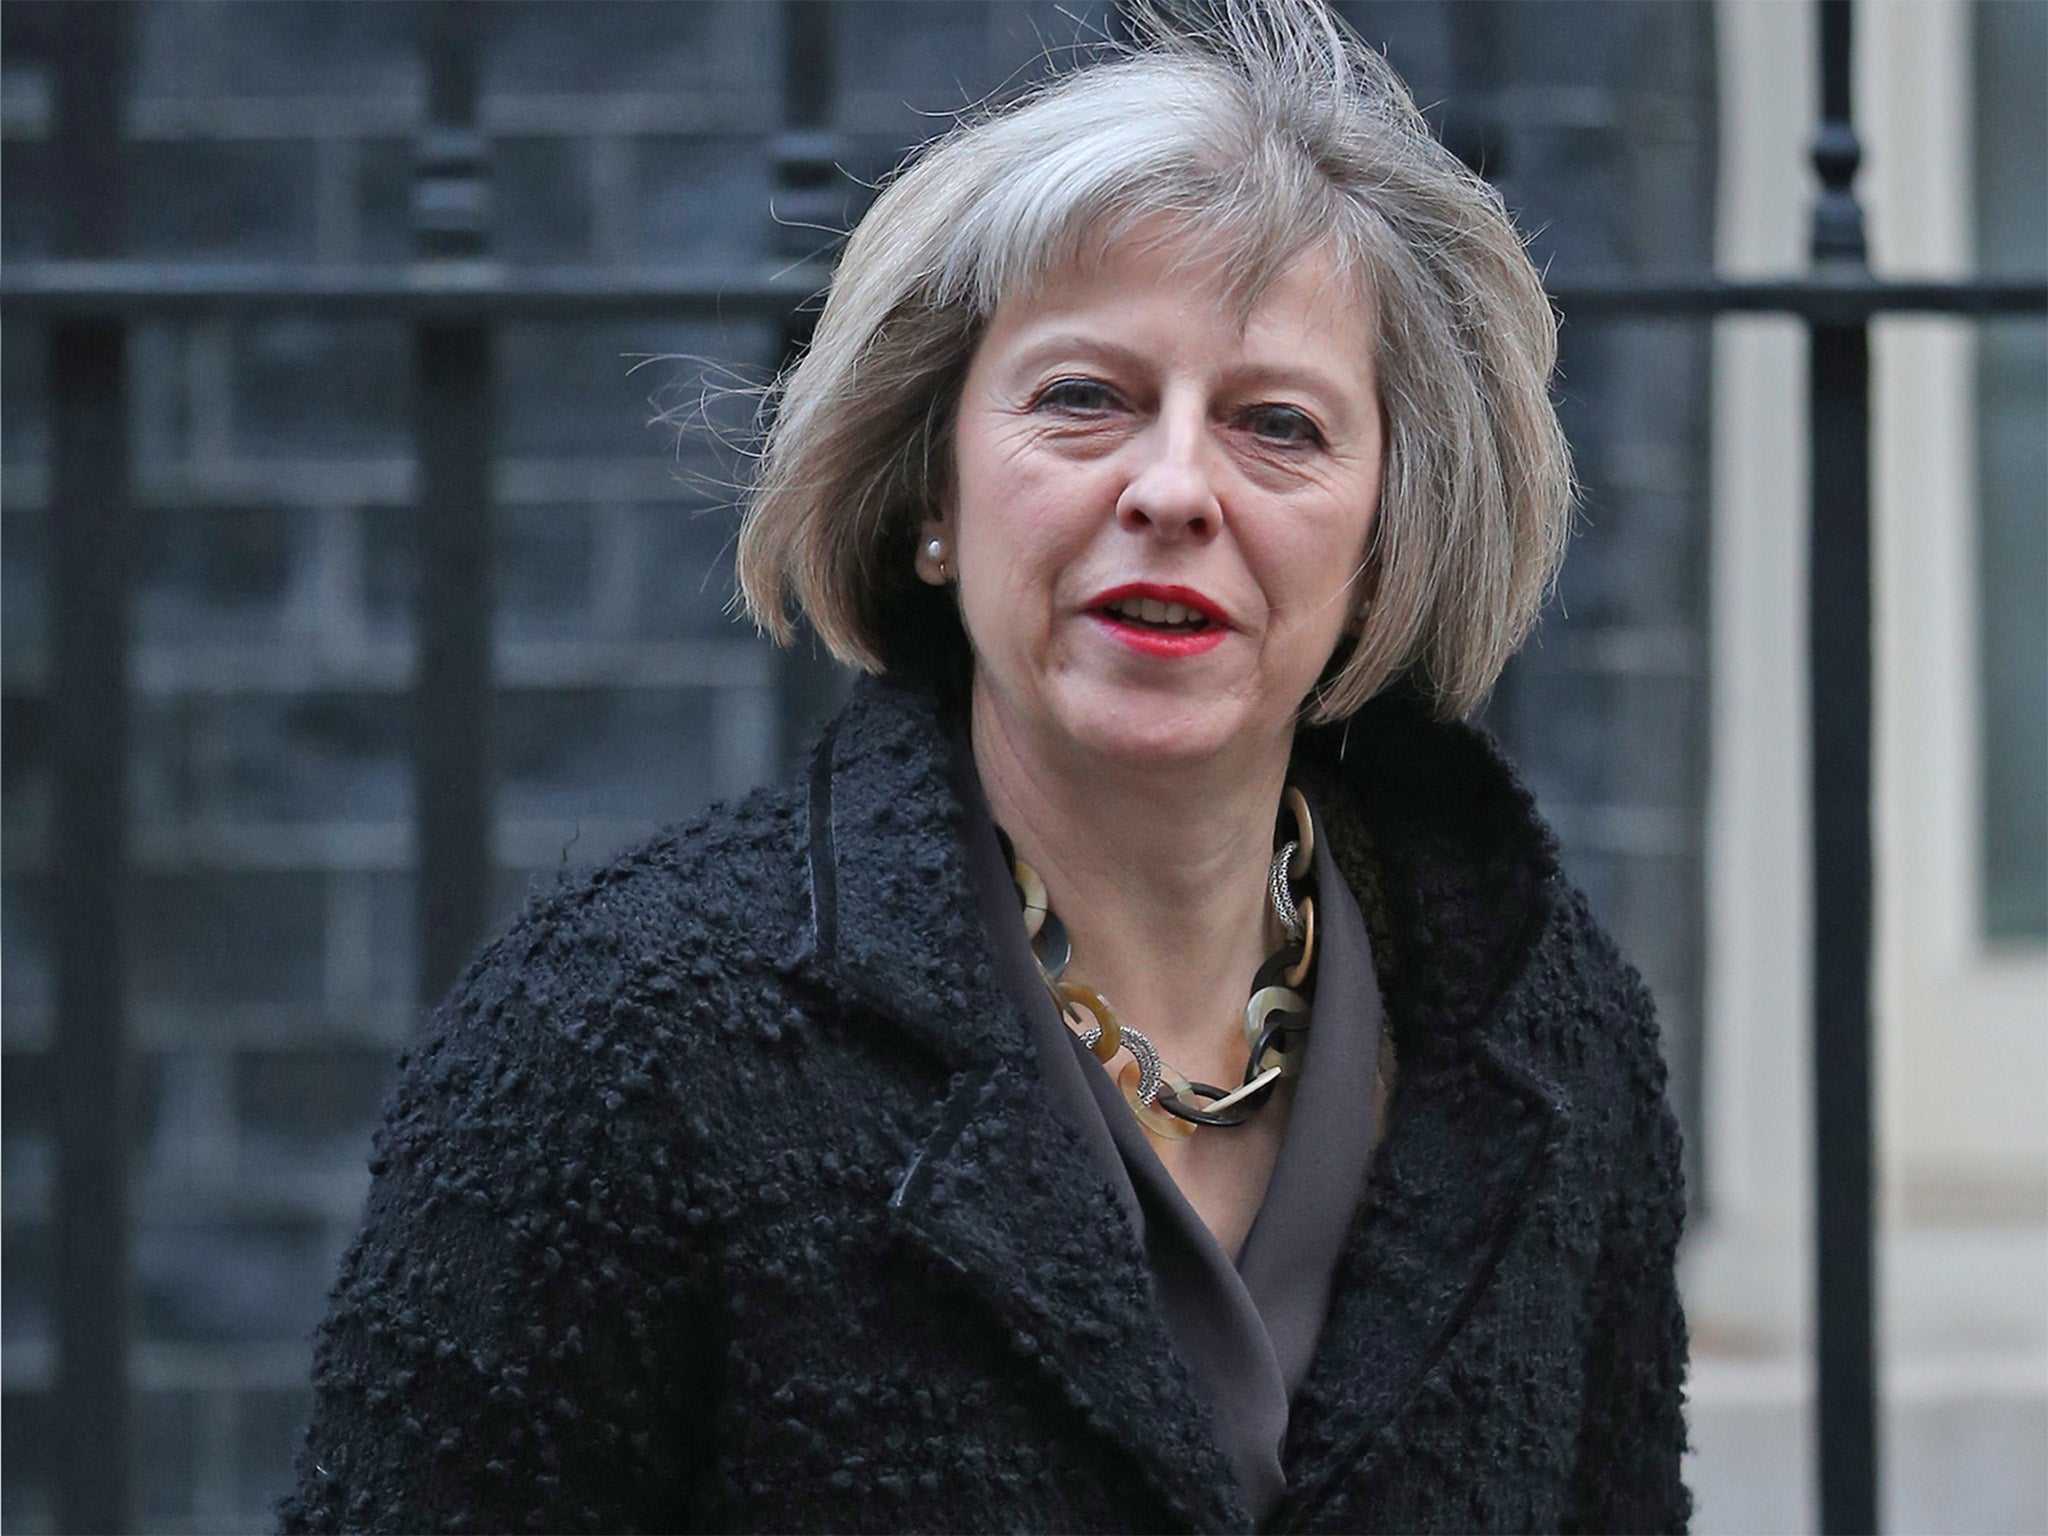 Theresa May said that immigration targets are likely to not be met by the next general election